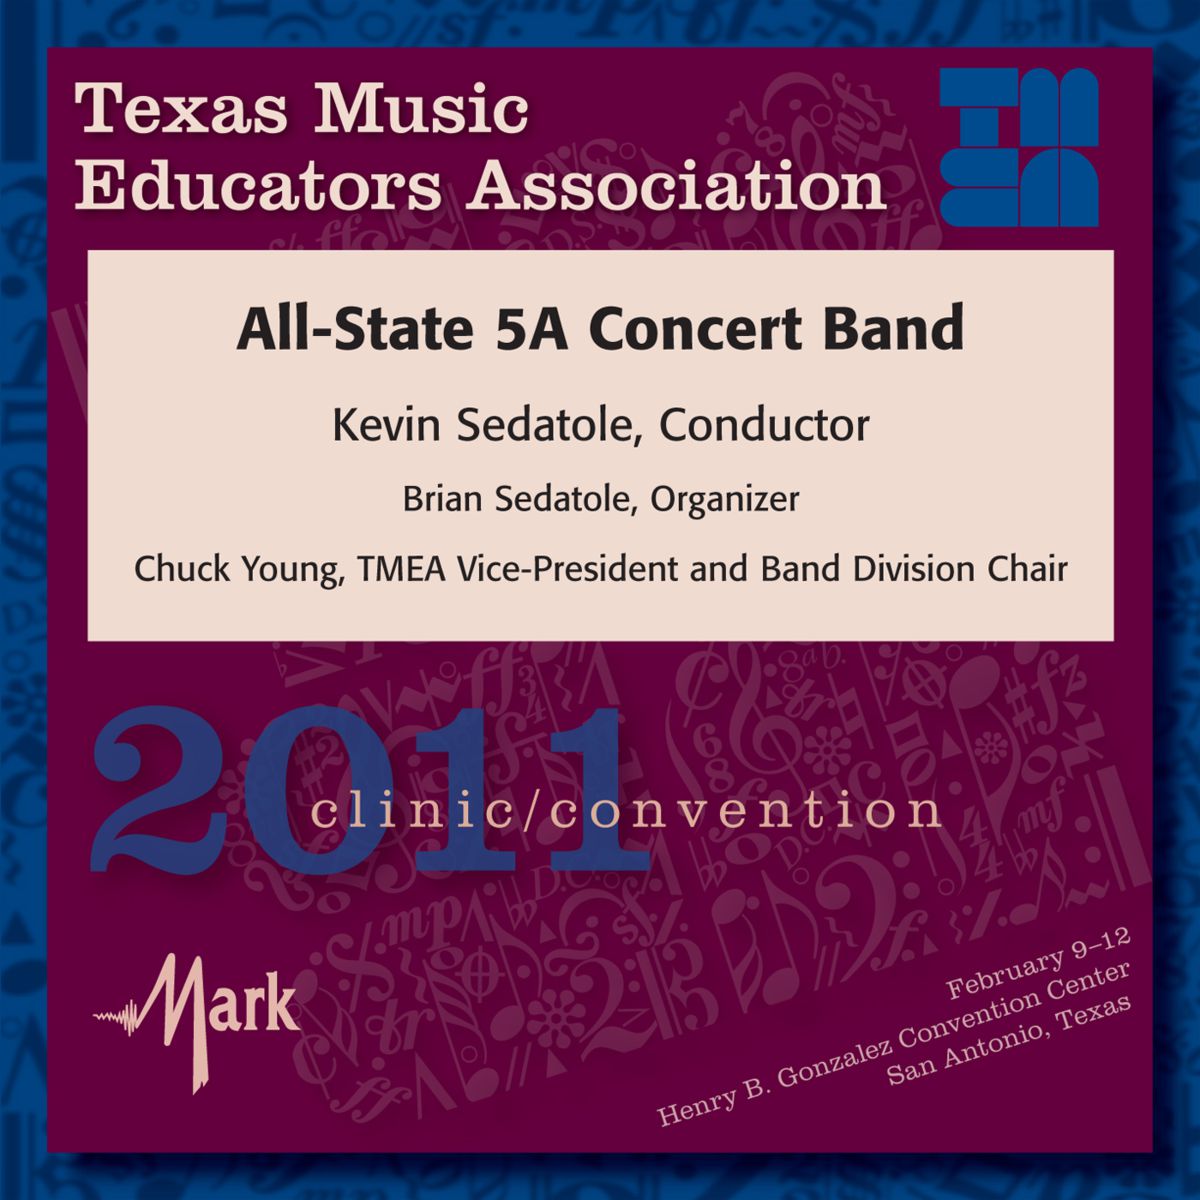 2011 Texas Music Educators Association: All-State 5A Concert Band - cliquer ici